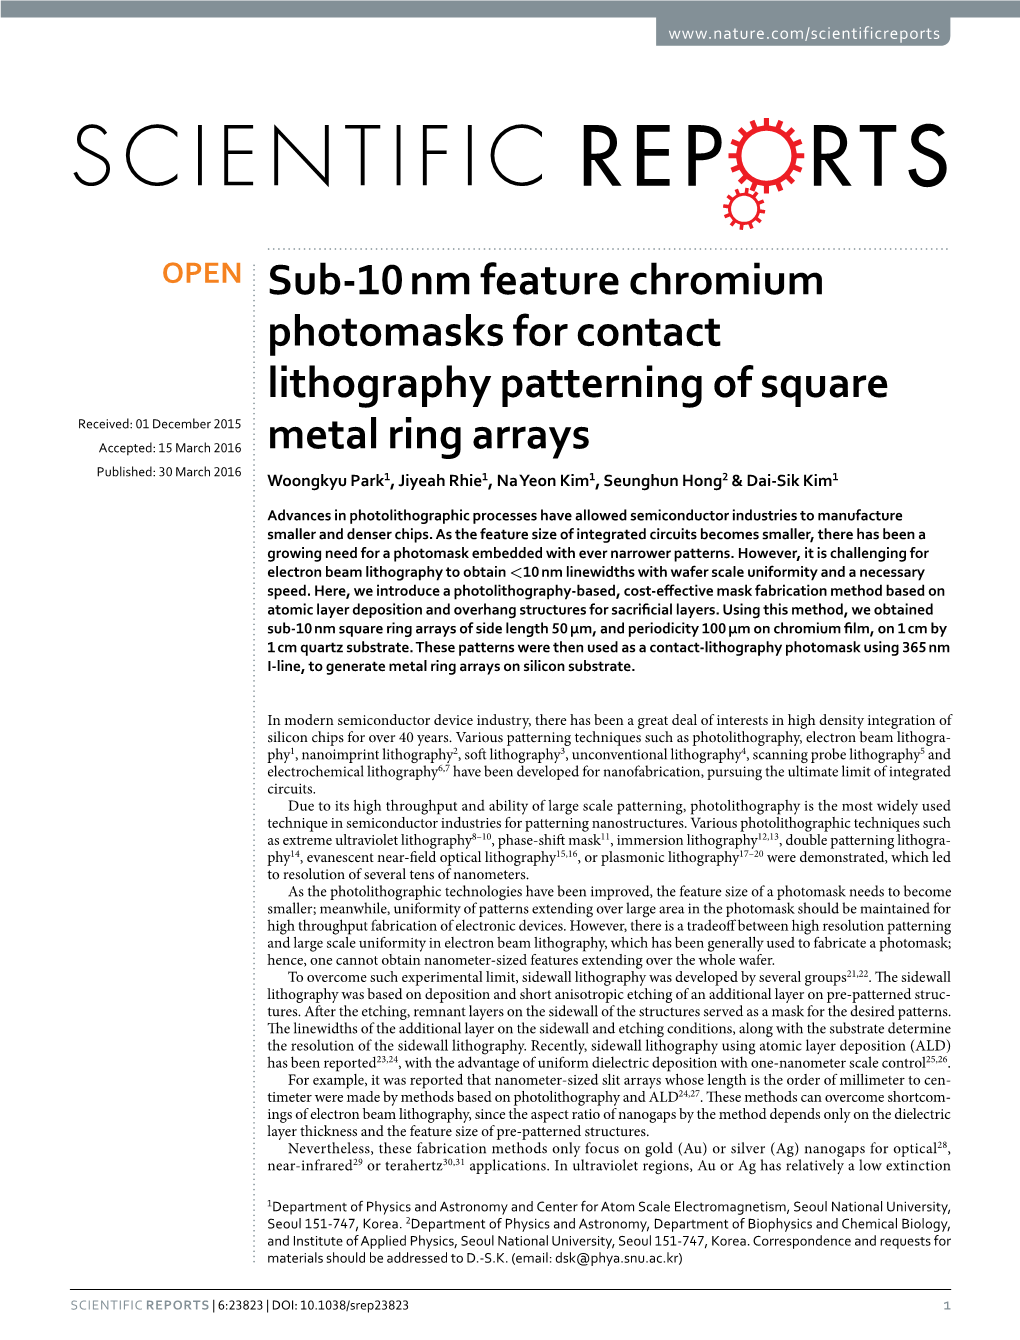 Sub-10 Nm Feature Chromium Photomasks for Contact Lithography